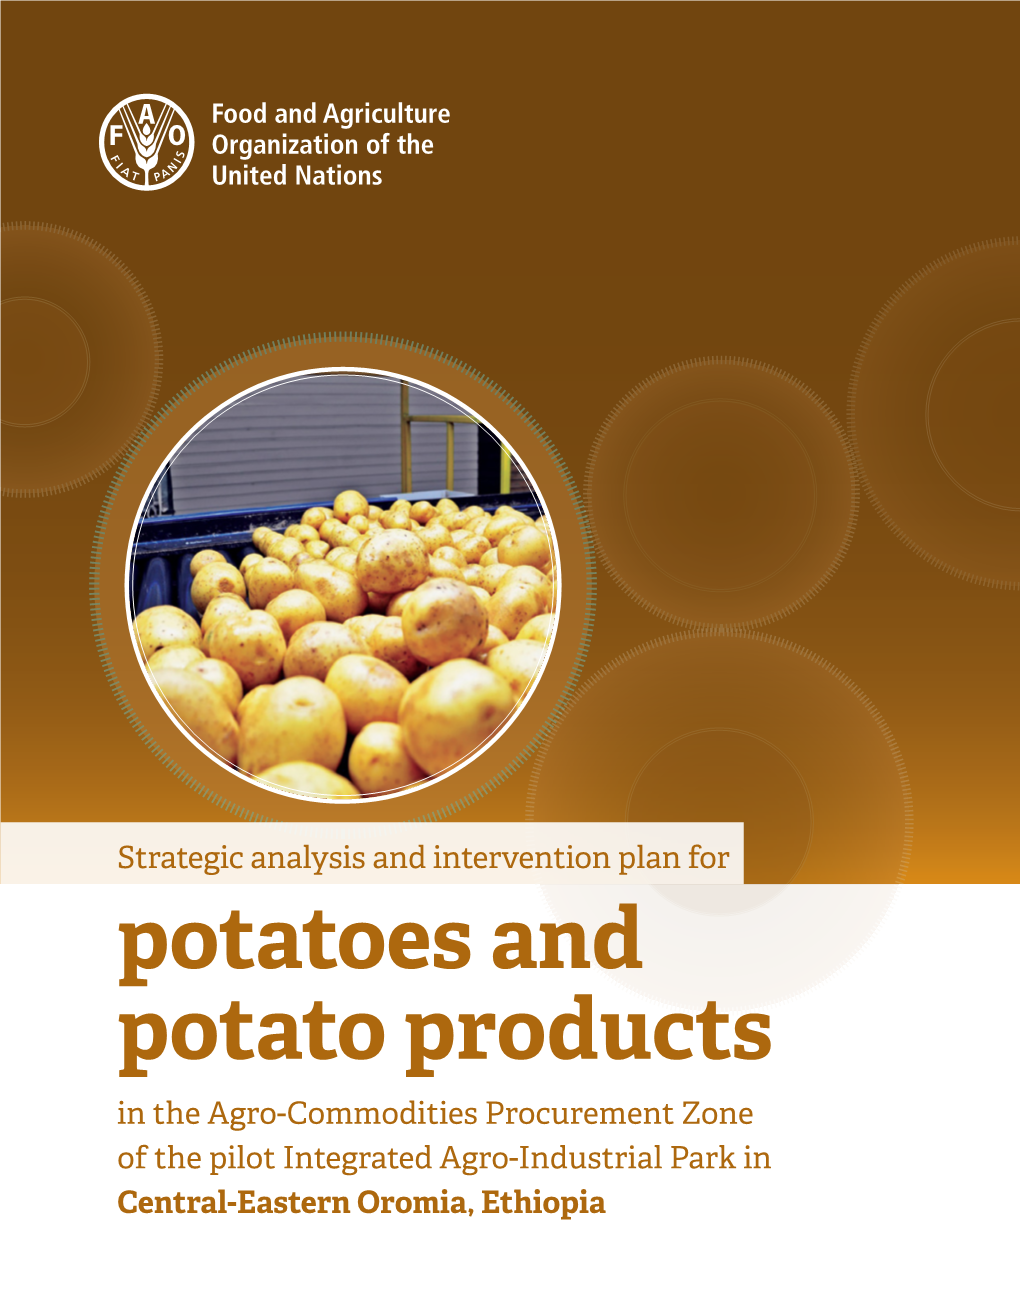 Potatoes and Potato Products in the Agro-Commodities Procurement Zone of the Pilot Integrated Agro-Industrial Park in Central-Eastern Oromia, Ethiopia